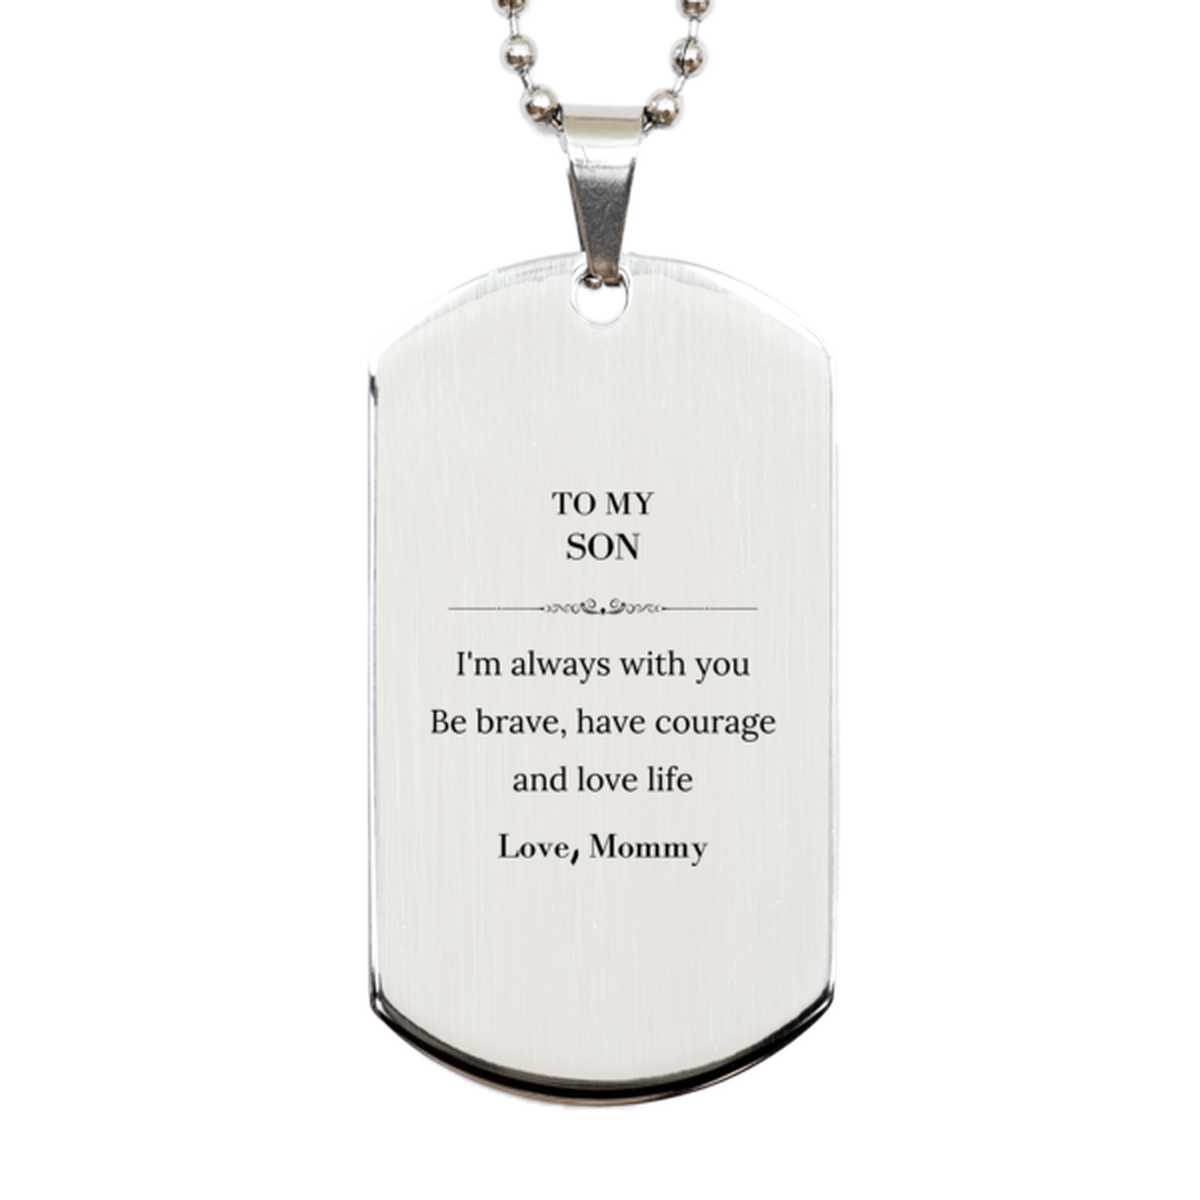 To My Son Gifts from Mommy, Unique Silver Dog Tag Inspirational Christmas Birthday Graduation Gifts for Son I'm always with you. Be brave, have courage and love life. Love, Mommy